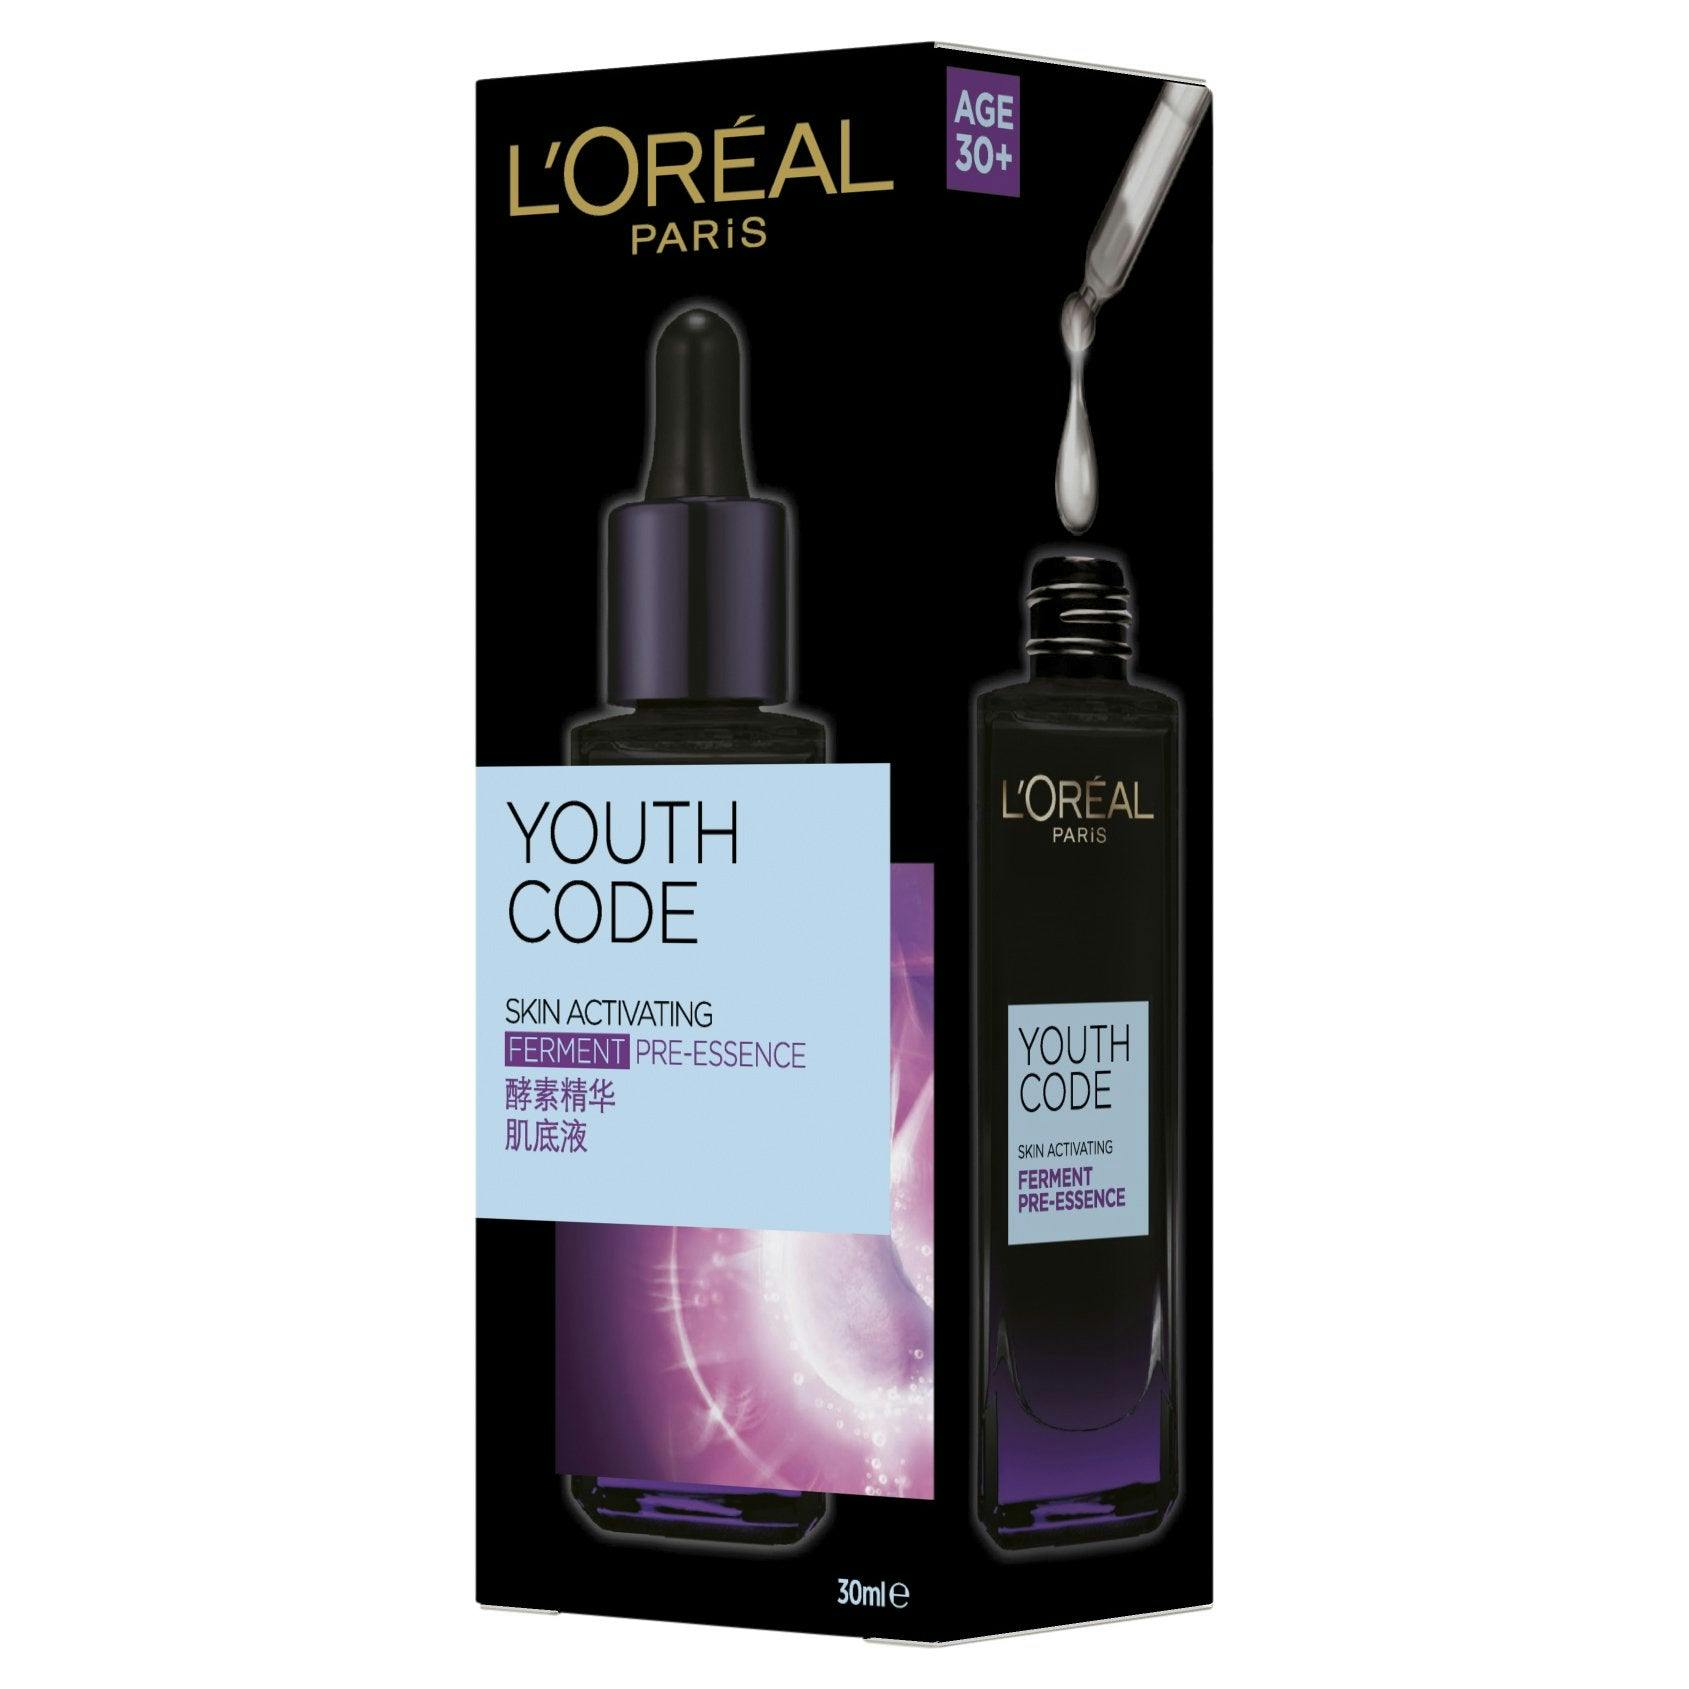 L'Oreal Paris Youth Code Skin Activating Ferment Pre-Essence 30ml